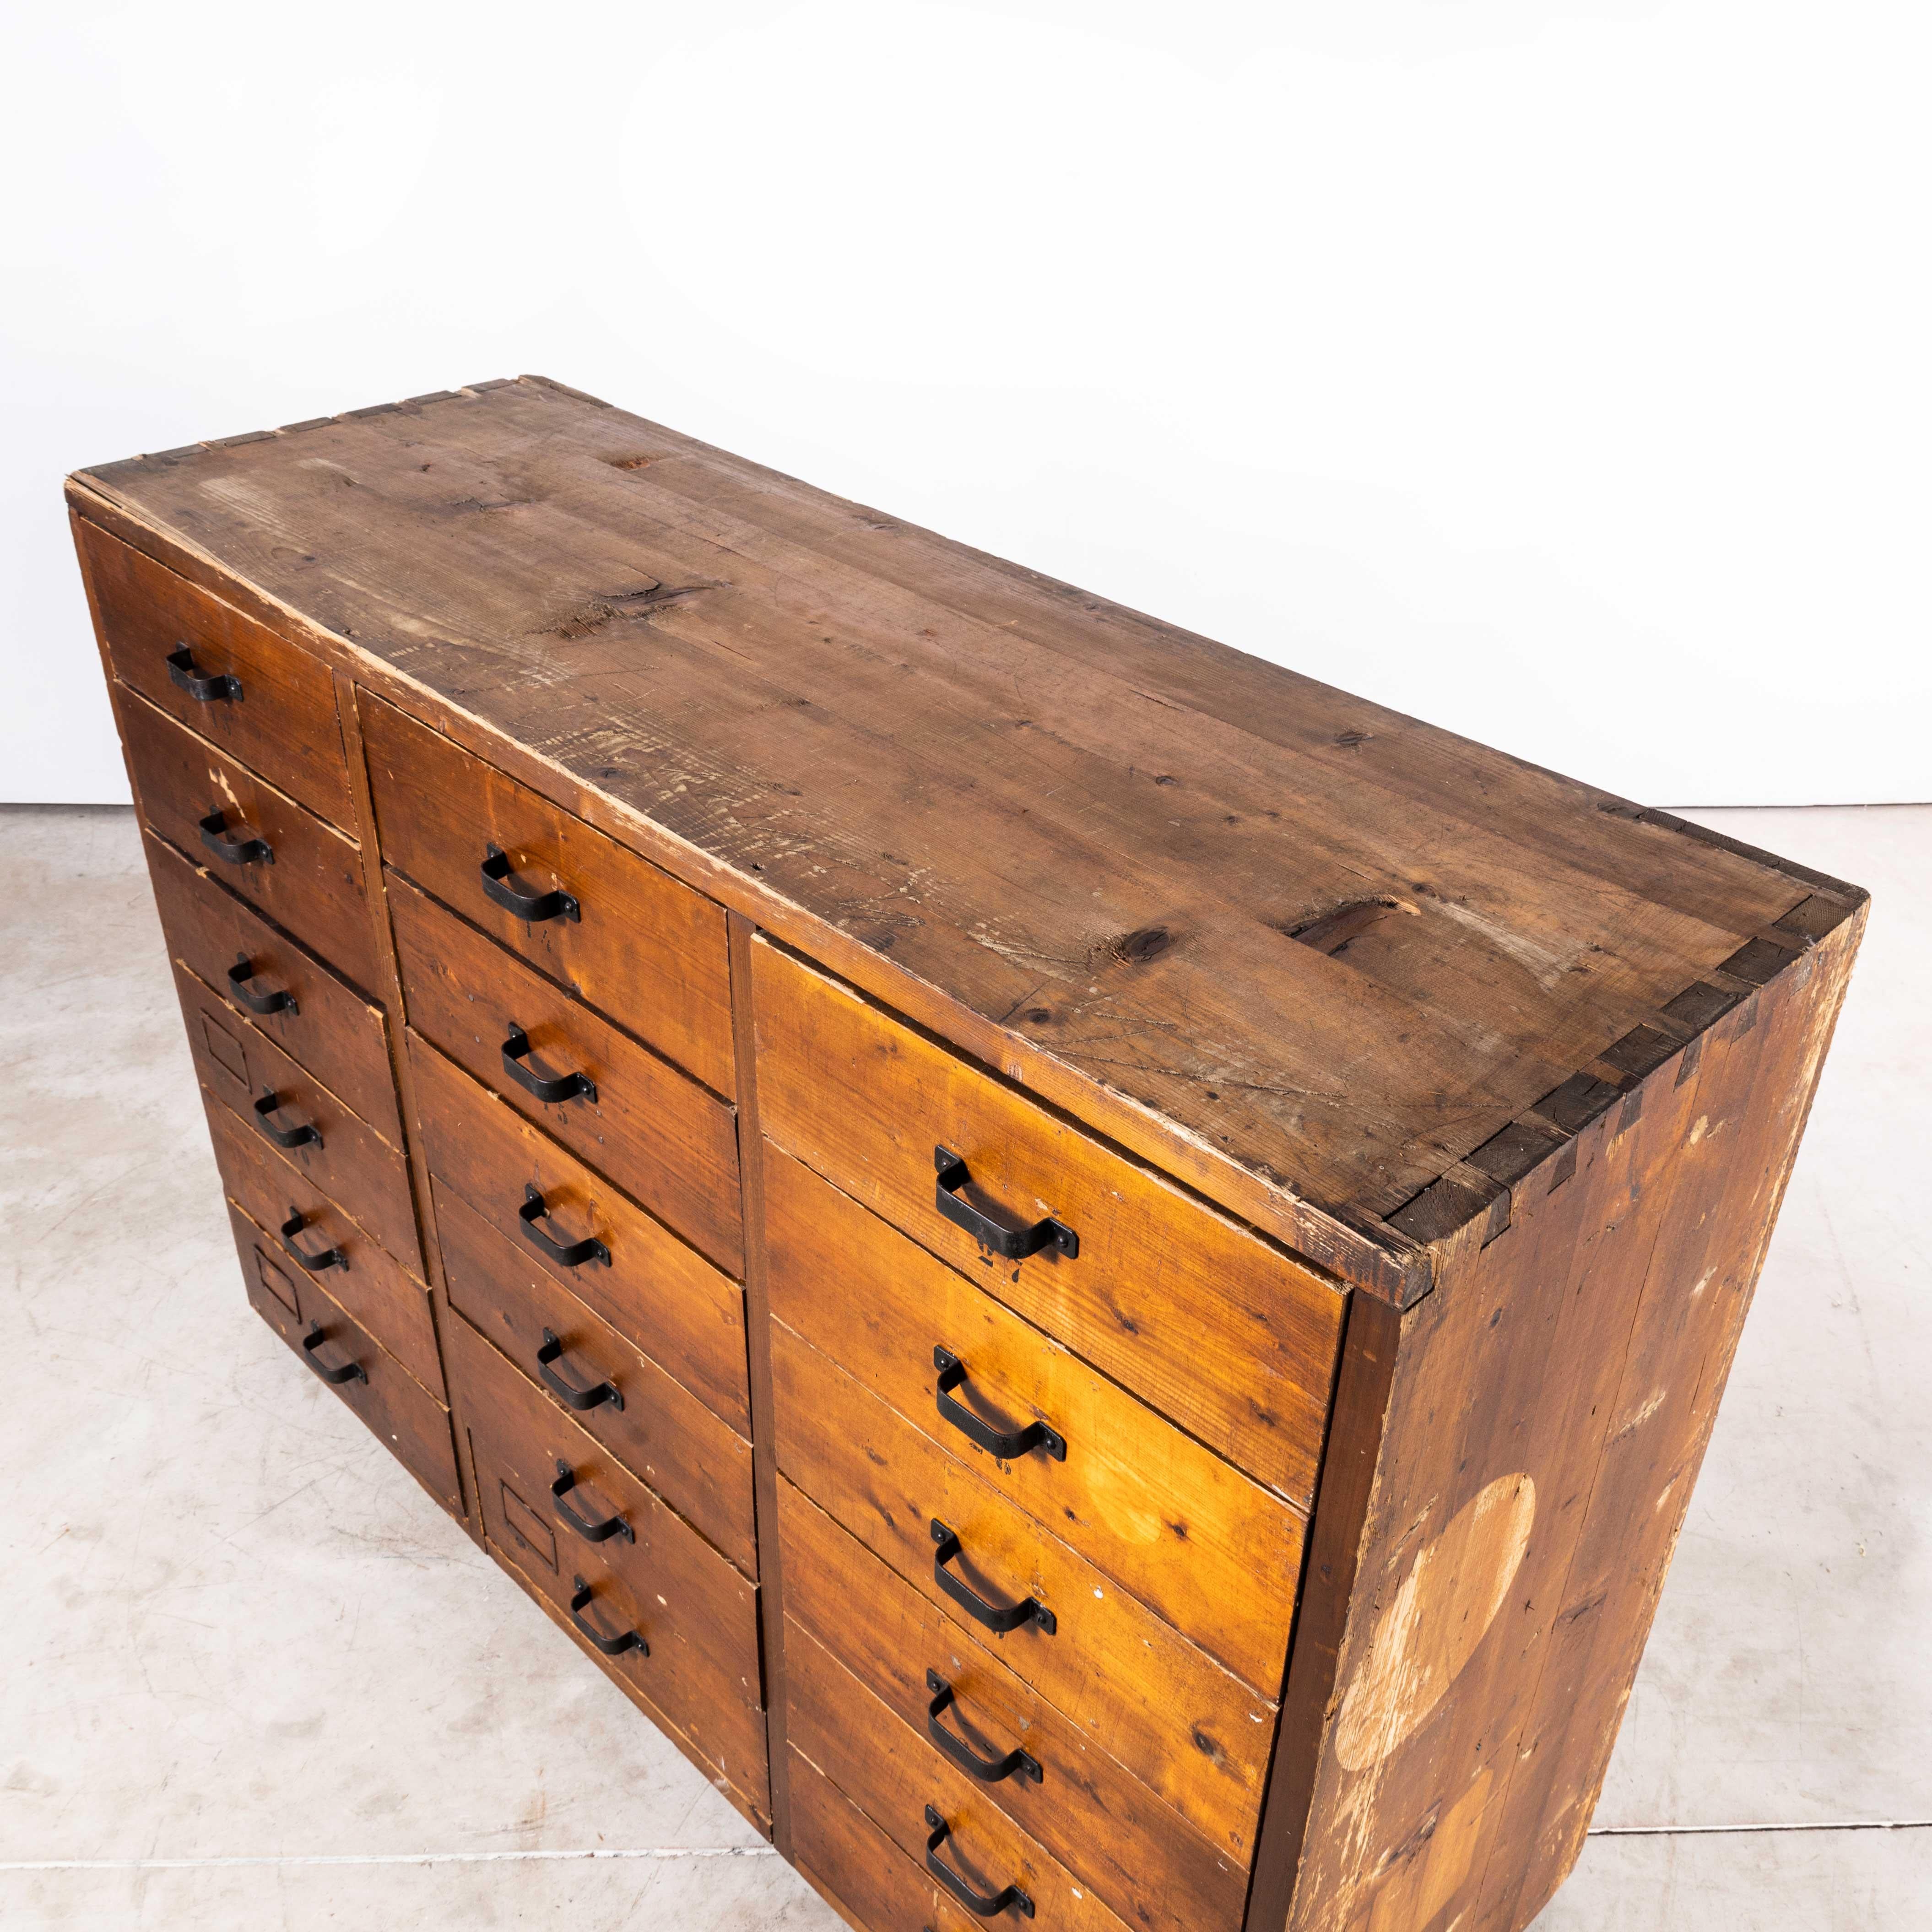 1950’s Orginal French Workshop Bank Of Drawers – Twenty One Drawers
1950’s Original French Workshop Bank Of Drawers. Large bank of twenty one drawers, beautifully made in solid pitch pine. The carcass is made from solid pine boards and all the